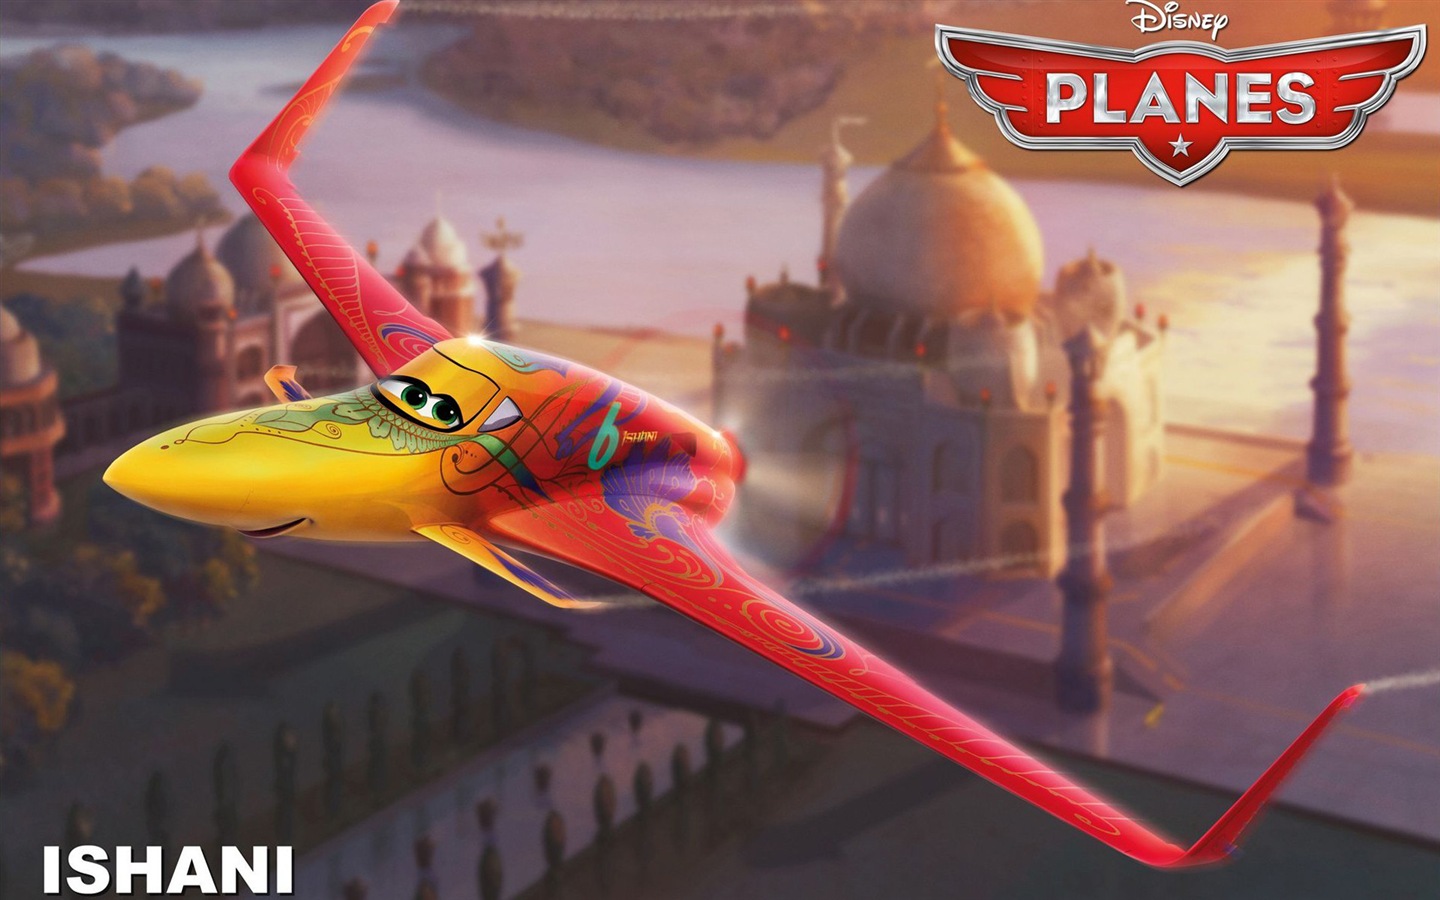 Planes 2013 HD wallpapers #1 - 1440x900